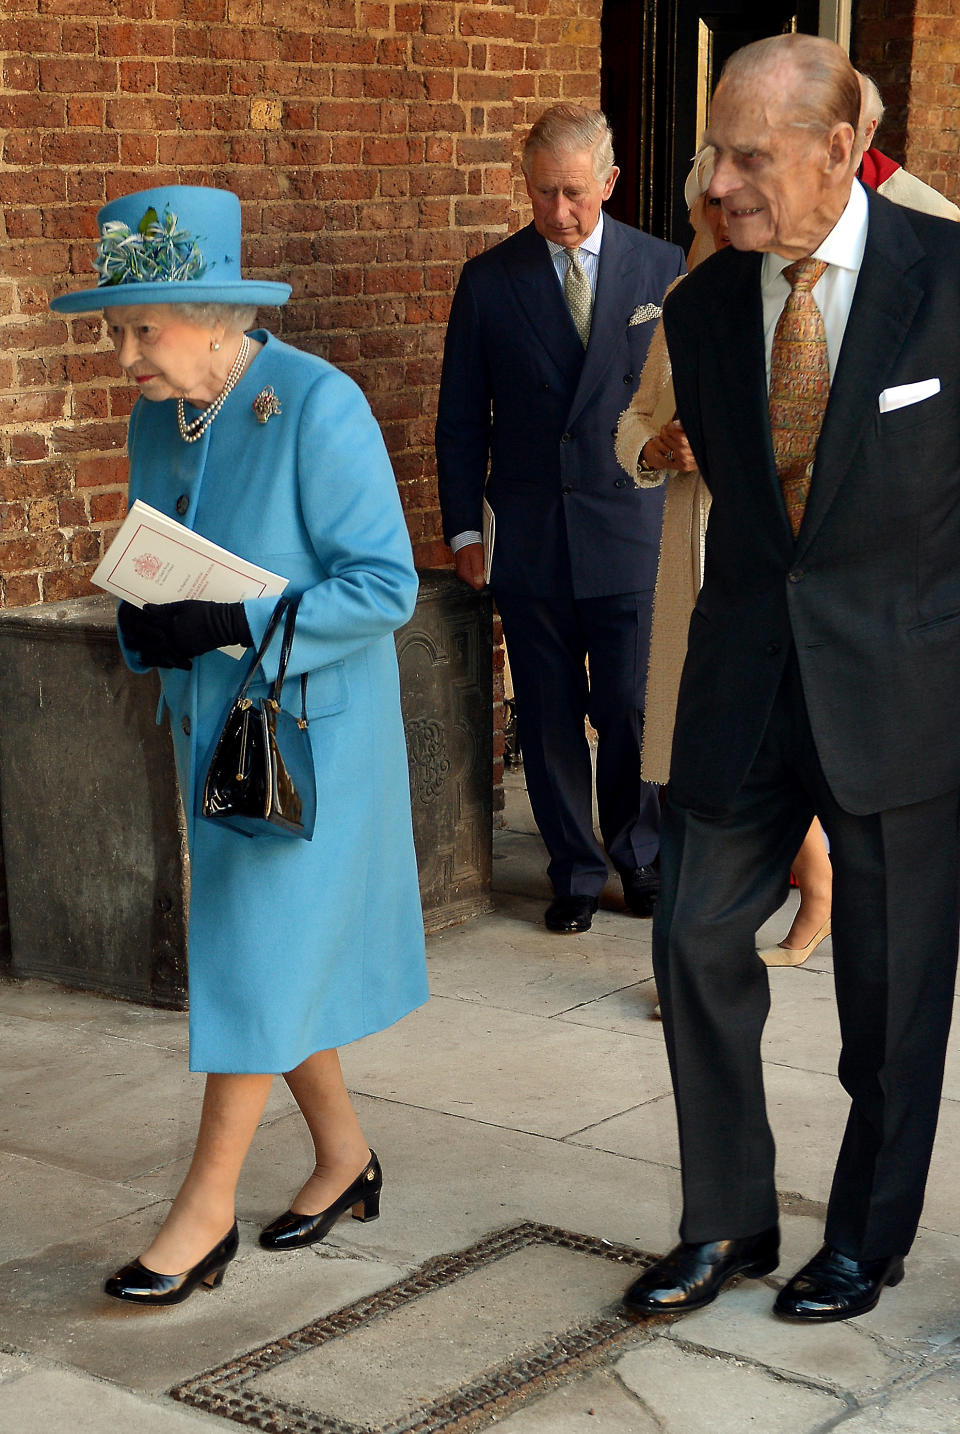 Prince Philip and the Queen are pictured at Prince George's christening in 2013. [Photo: Getty Images]